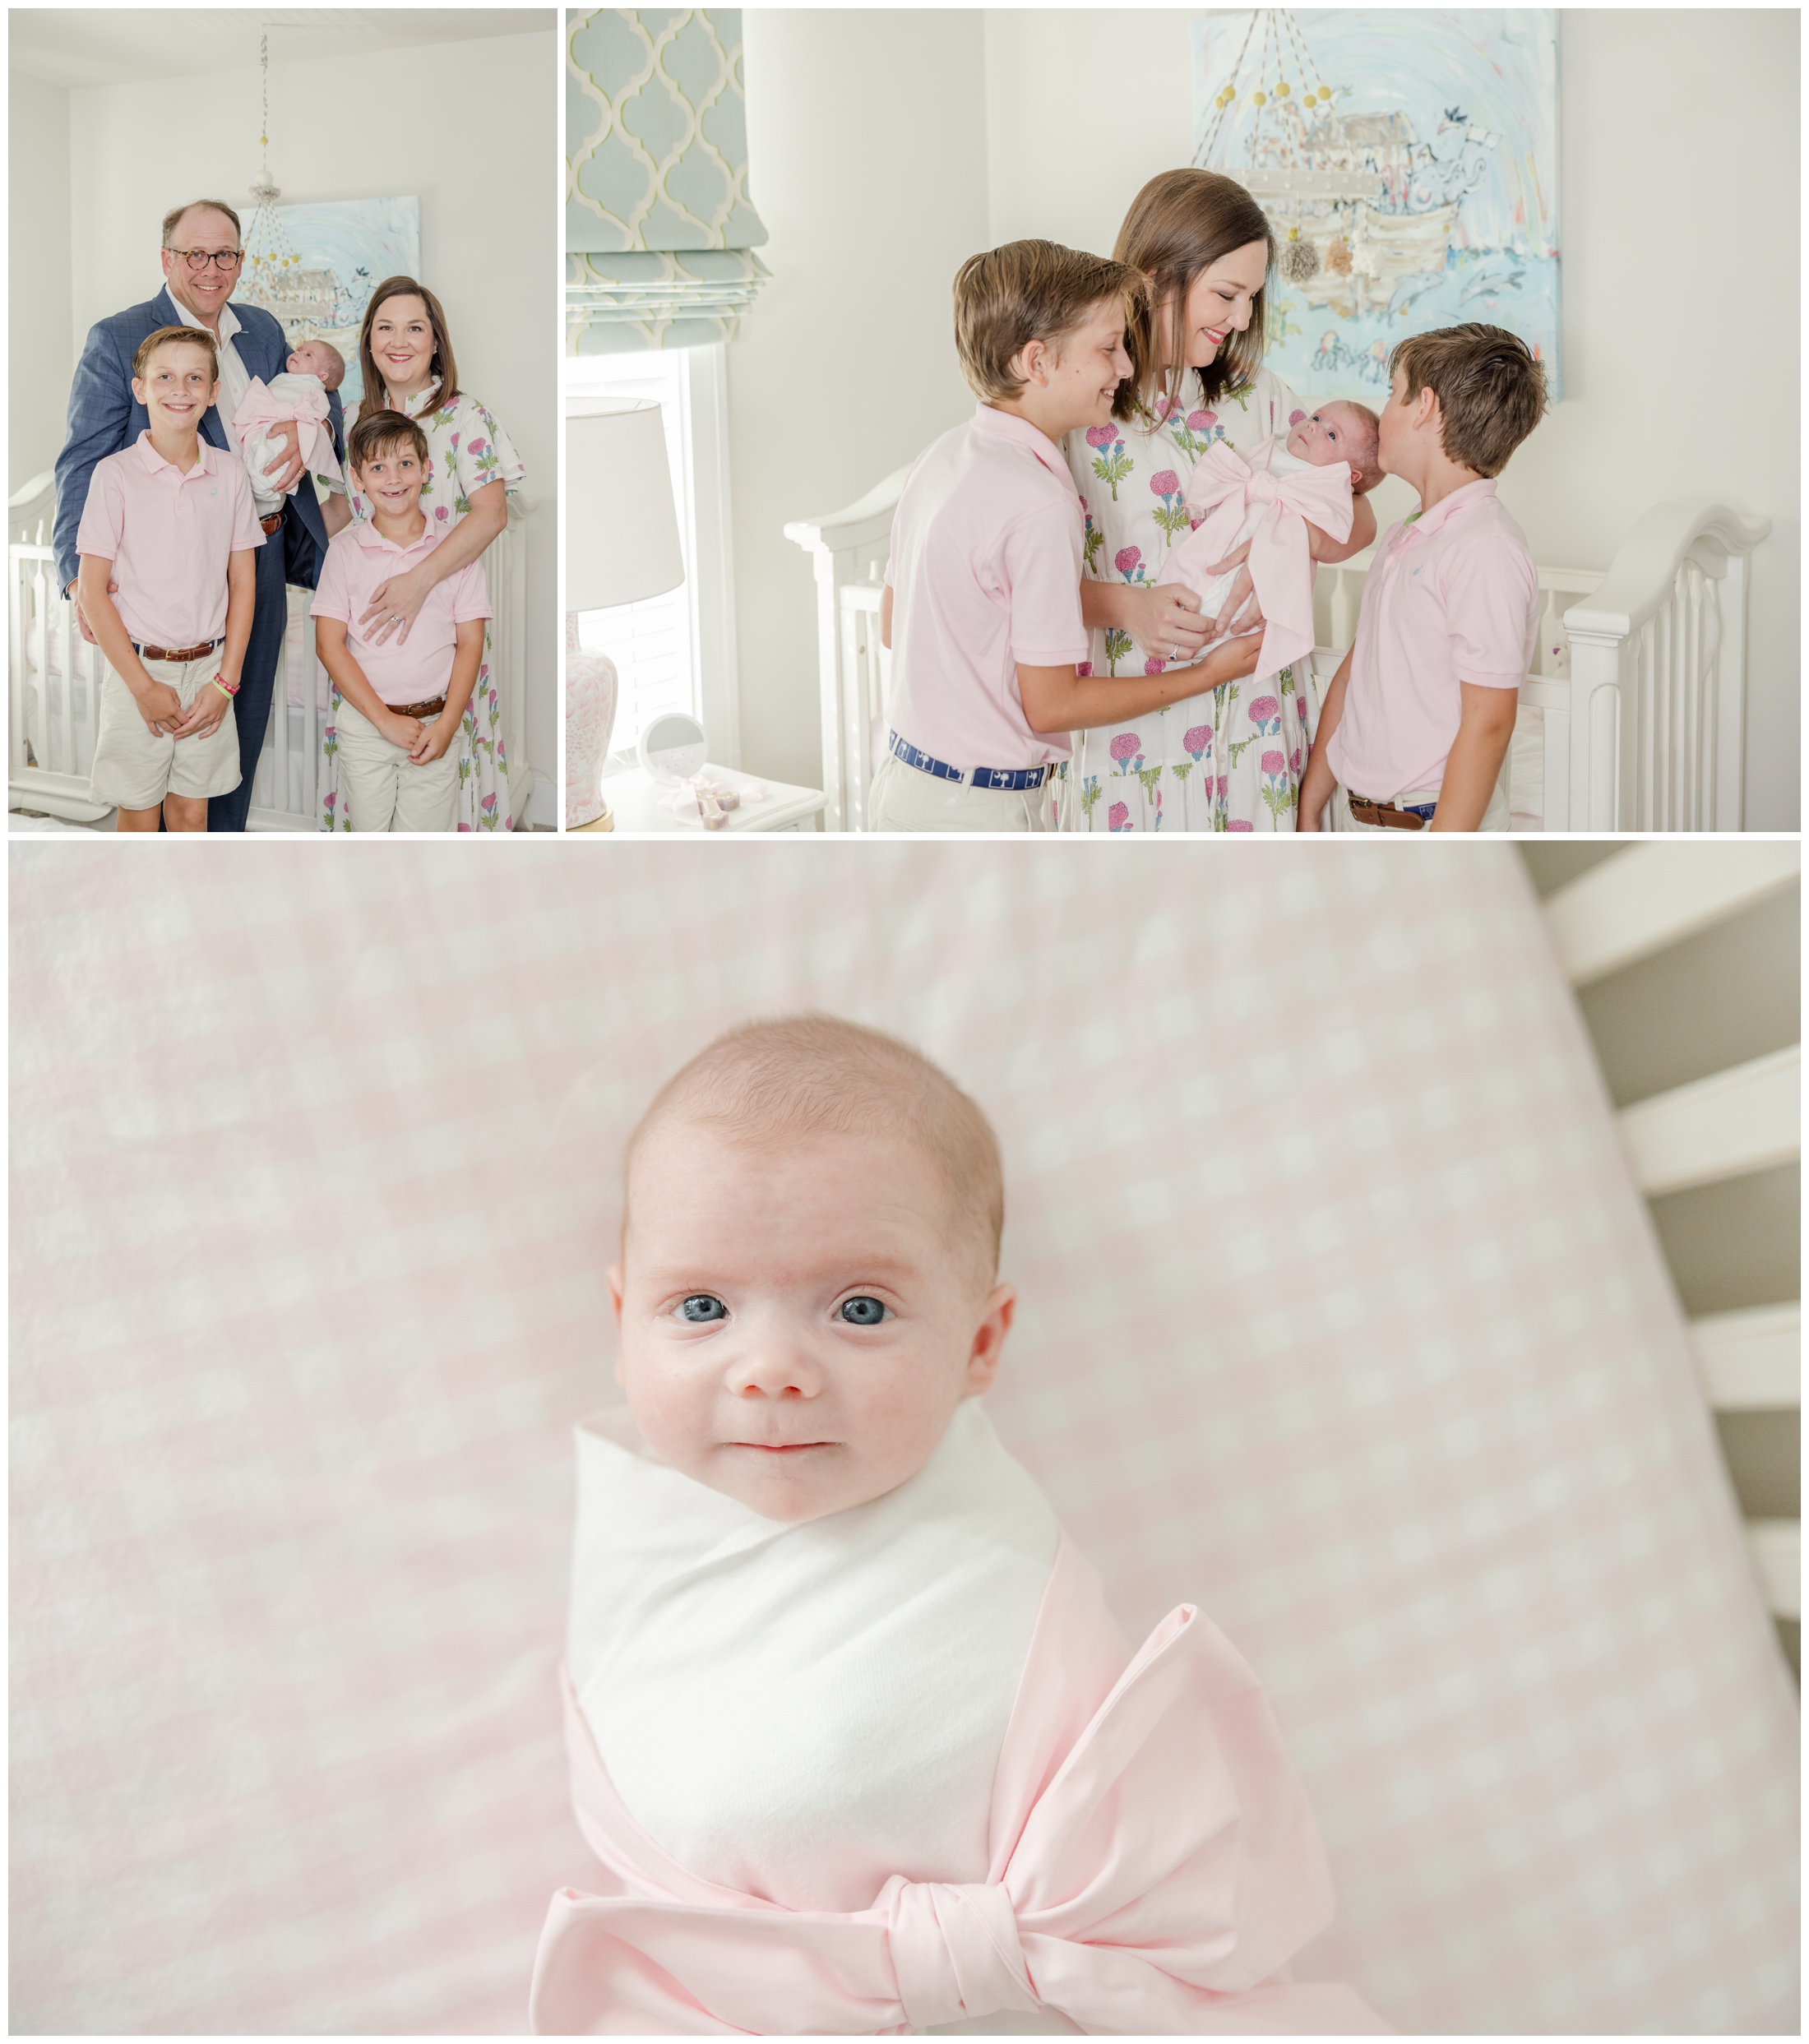 Three photos of a family with two sons and a baby girl during their Greenville newborn photo session in their home.